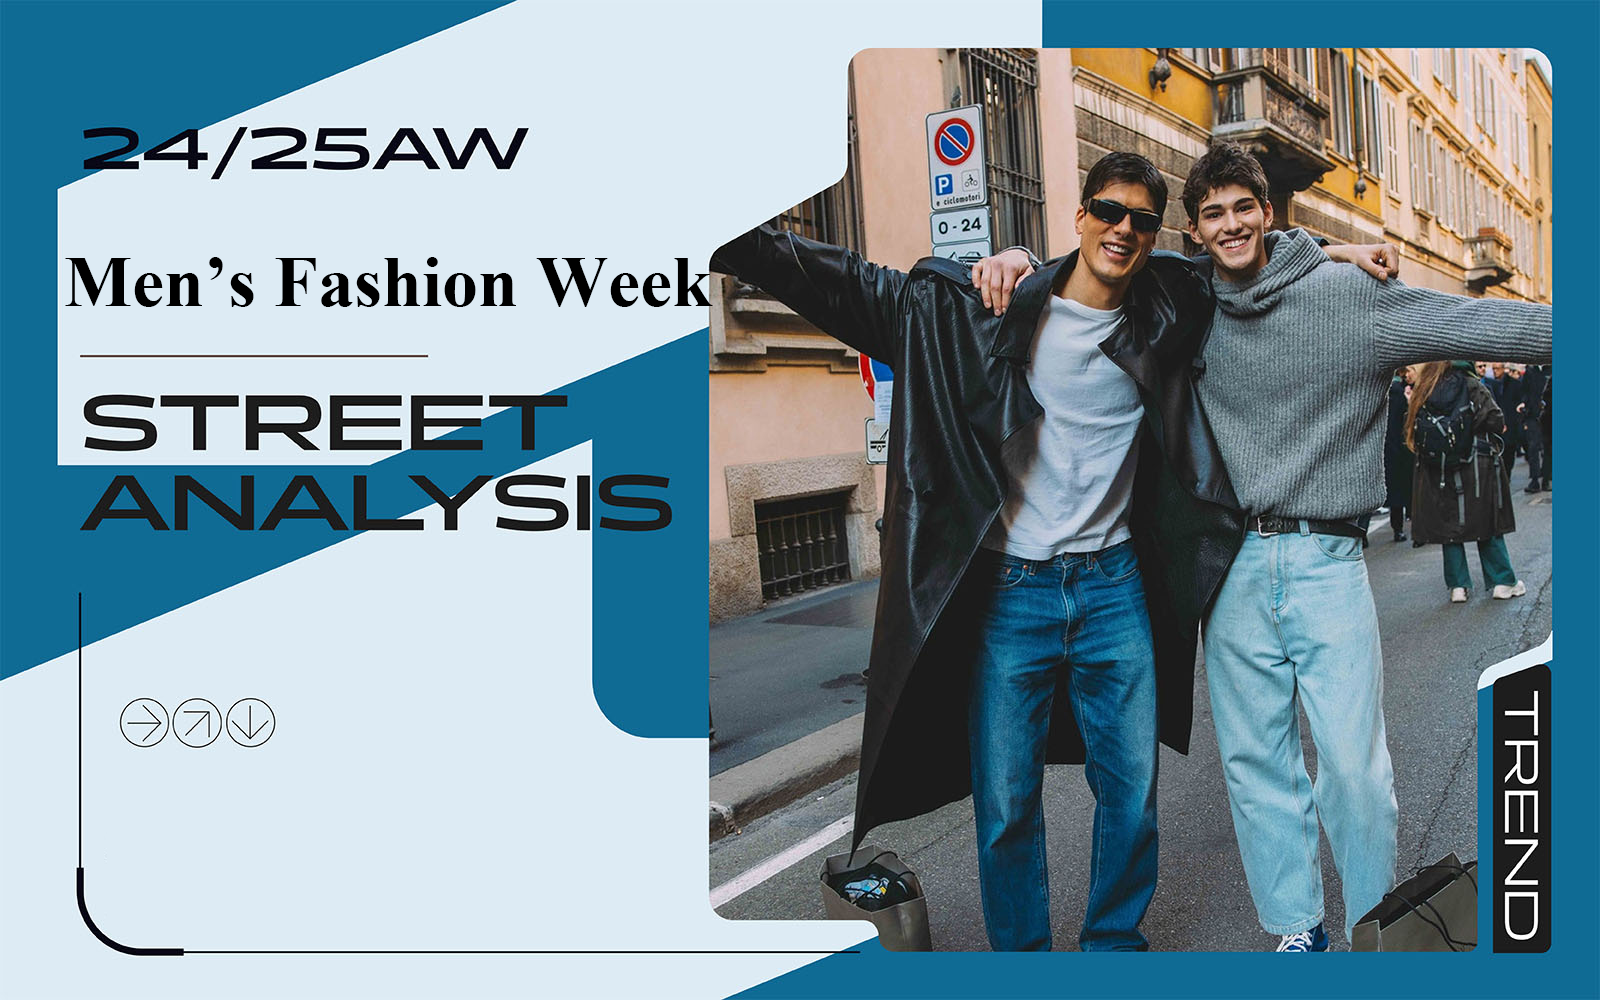 The Comprehensive Analysis of Men's Fashion Week Street Styles